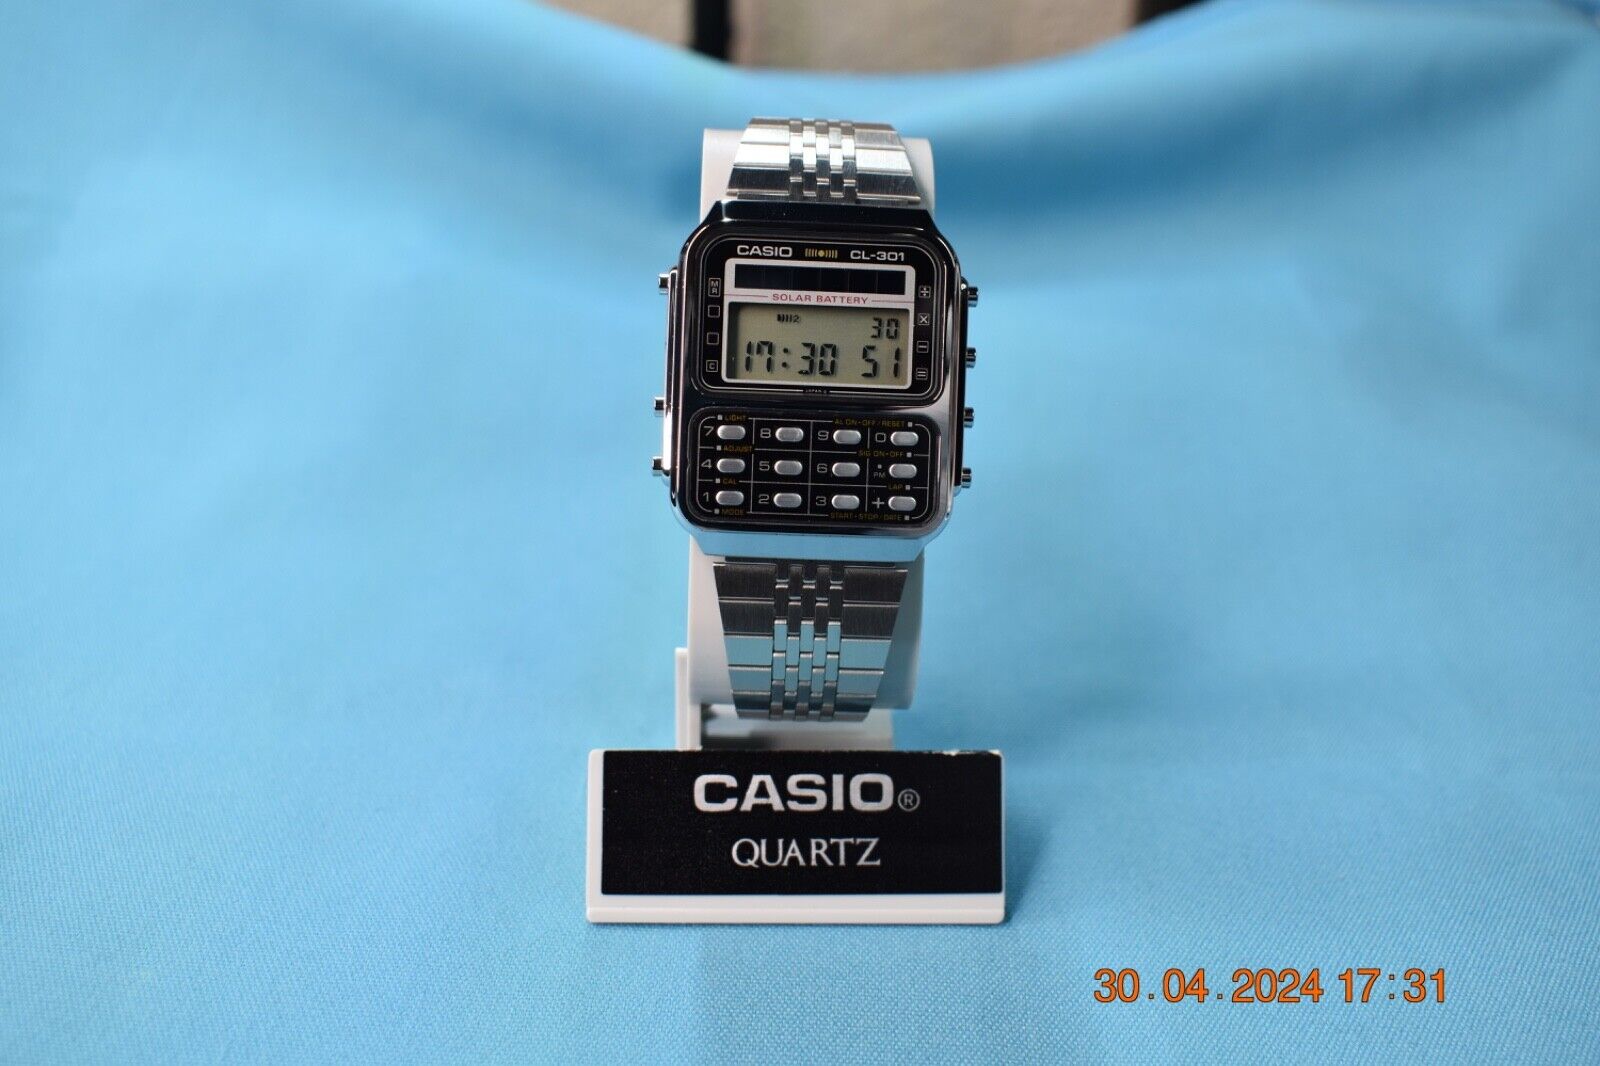 Vintage Casio CL-301 Calculator Solar Watch Very Rare to Find on this condition